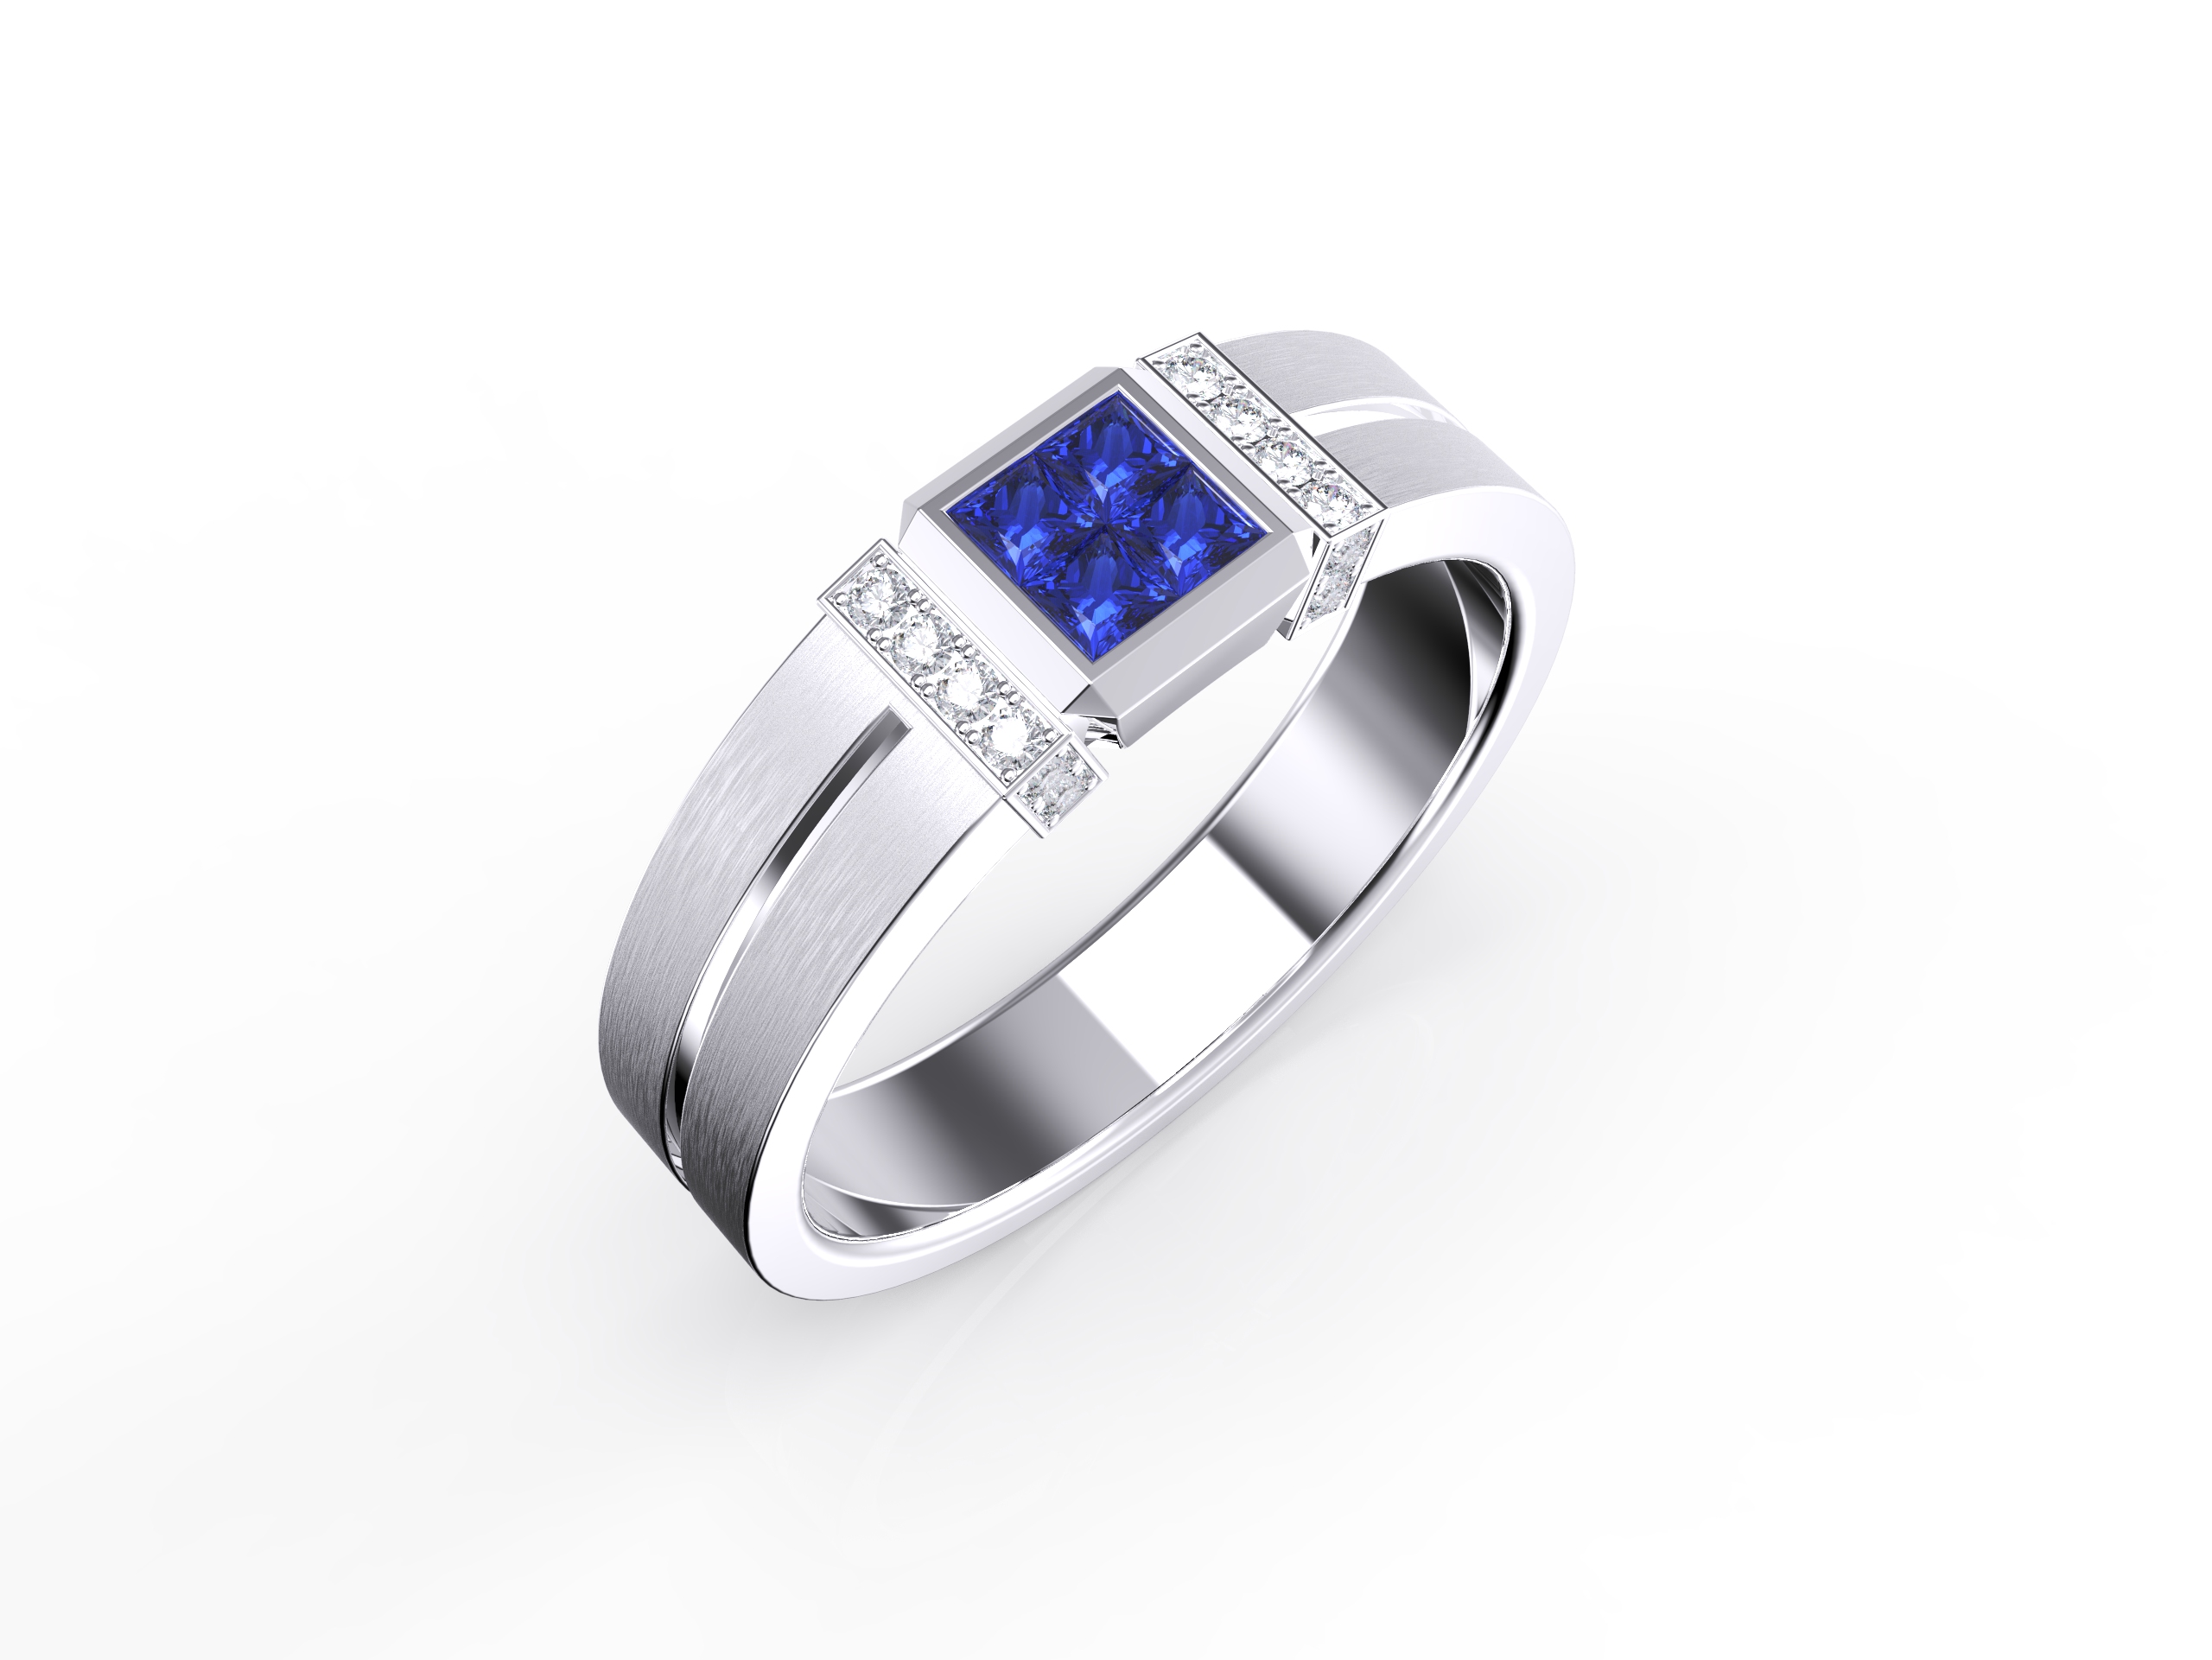 men's white gold ring with blue sapphire accent stone